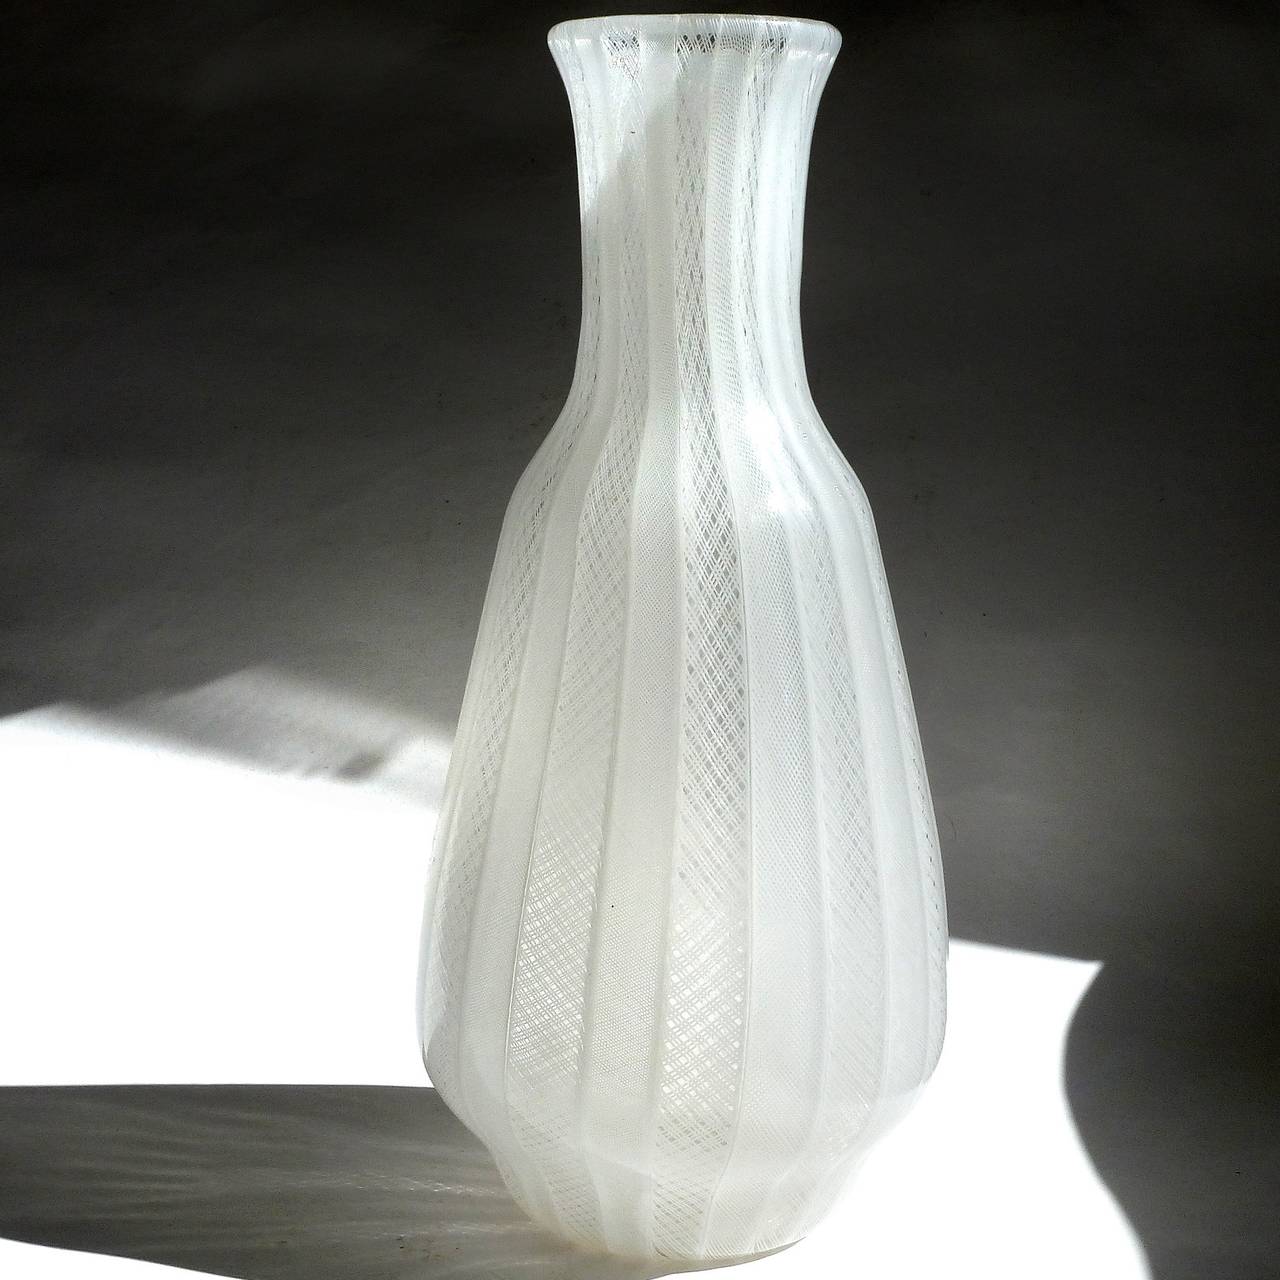 FREE Shipping Worldwide! See details below description.

Gorgeous and large Murano handblown pure white art glass zanfirico ribbons flower vase. Created in the manner of the Venini and Salviati companies. It has 2 different lace net designs that